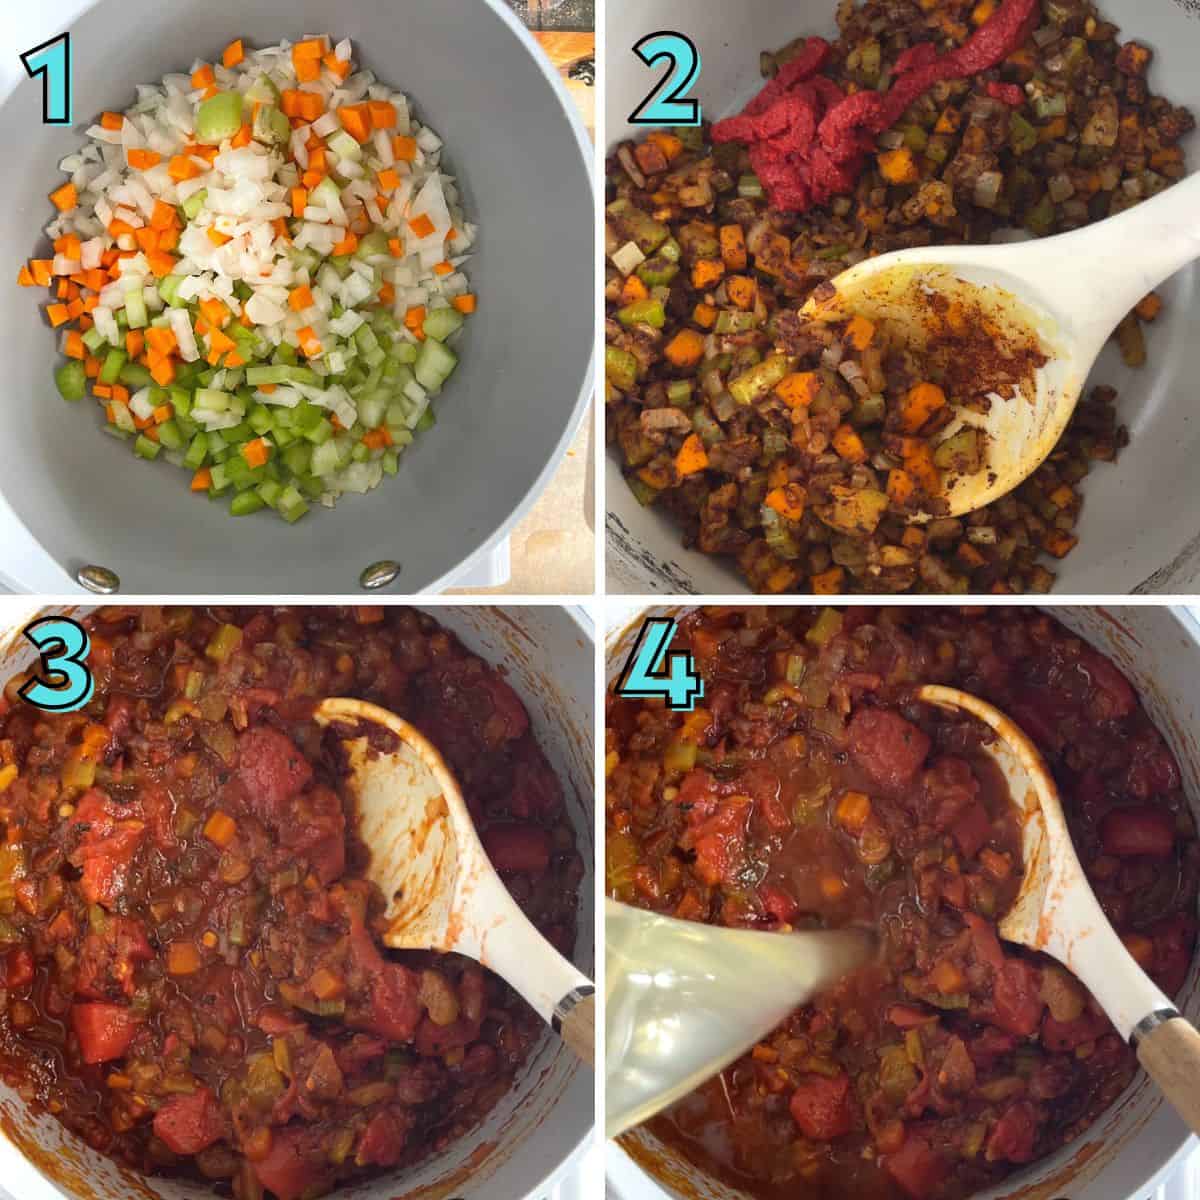 Step by step recipe instructions, in a collage.